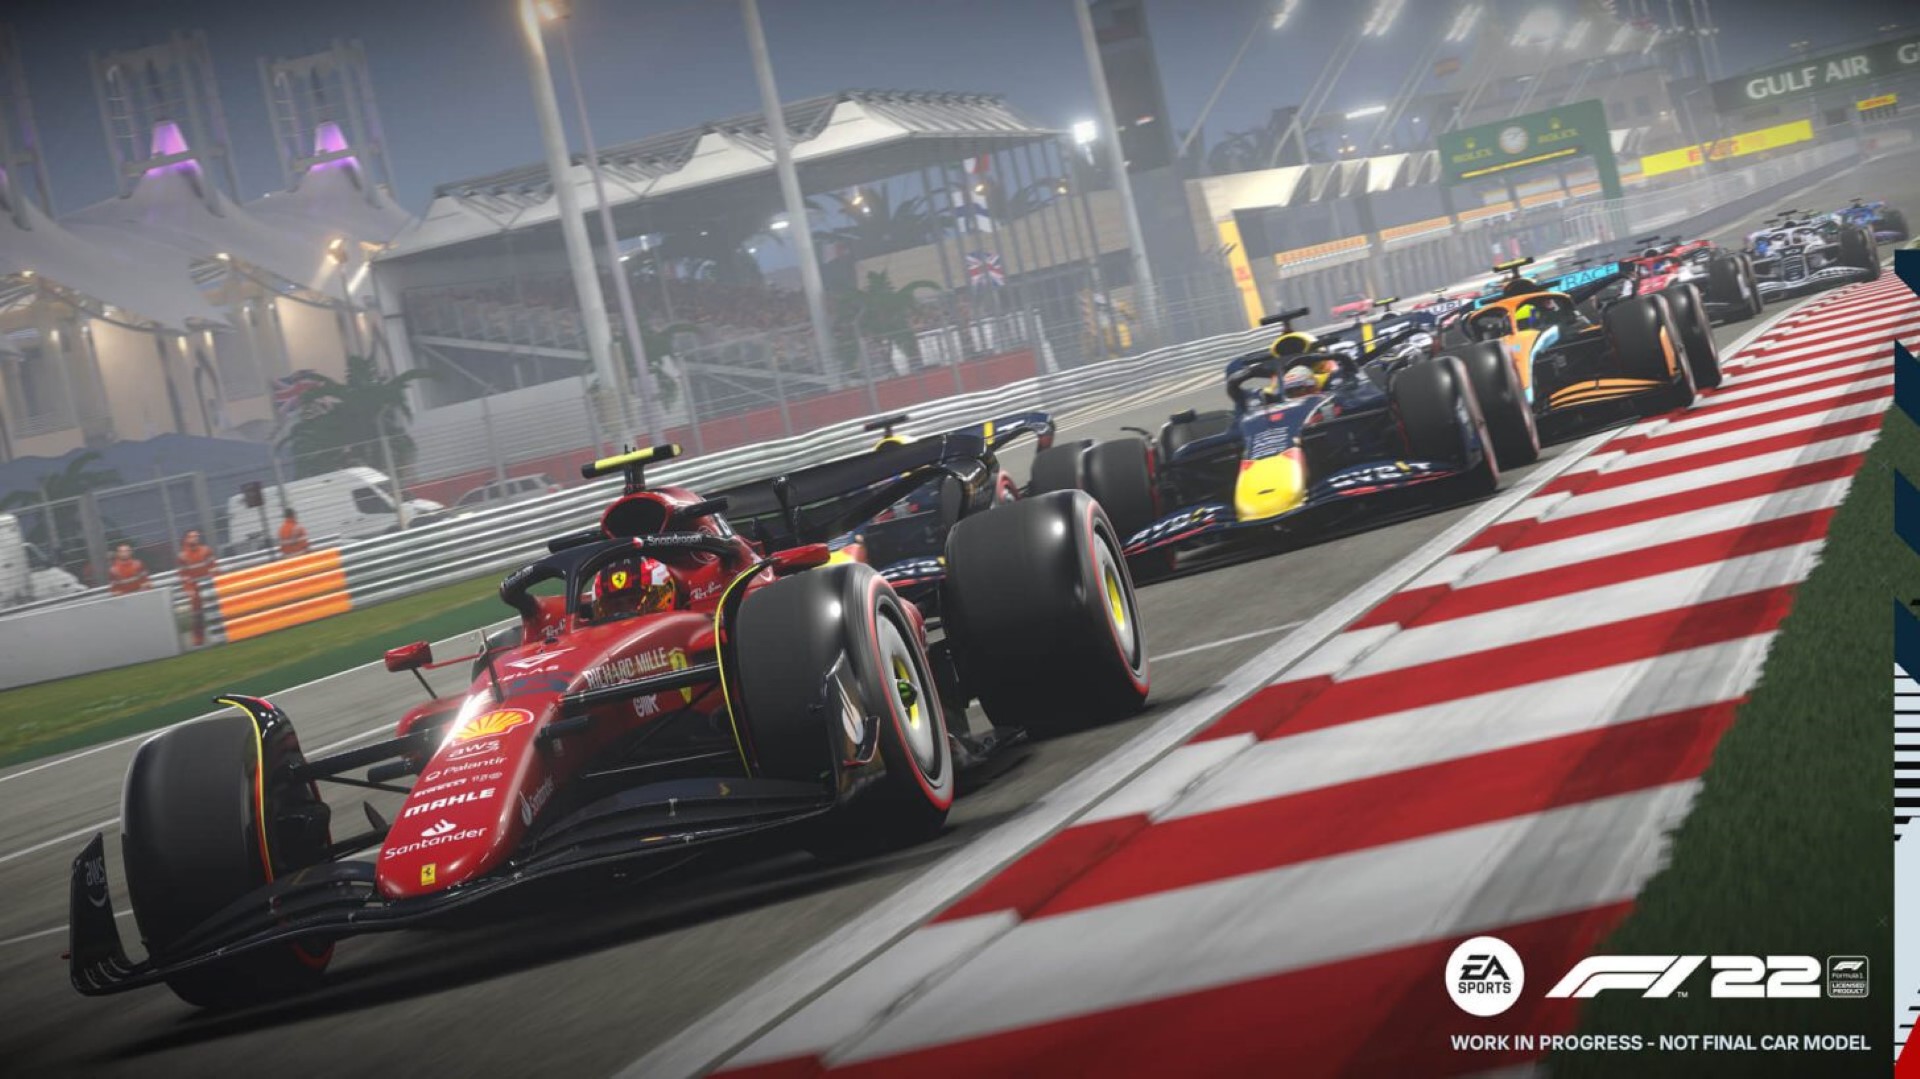 F1 2022 has DLSS to get better performance on PC